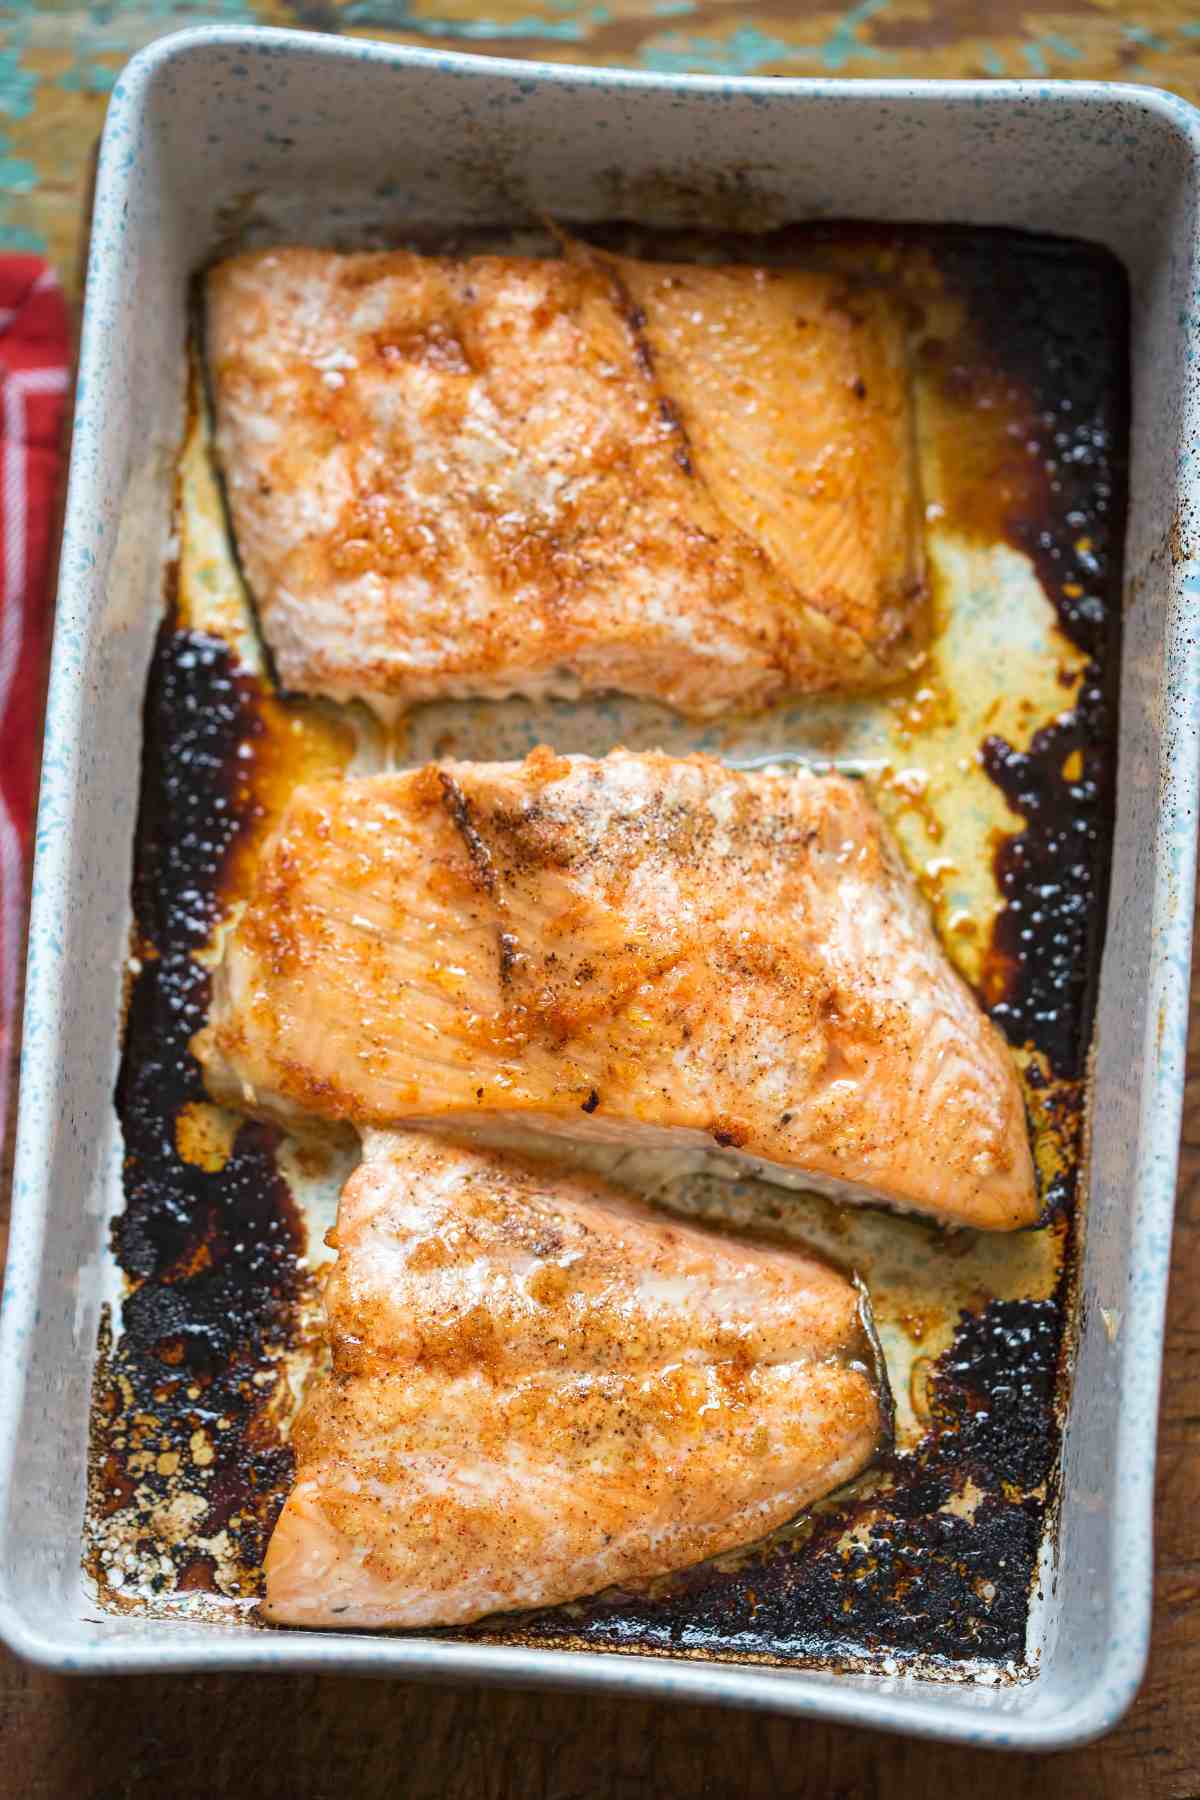 Have you wondered about the best Salmon Oven Temp to get the perfectly moist and flakey whole fish or salmon fillet? We’ve got you covered with how to bake salmon in the oven with different oven temperatures, with or without foil!